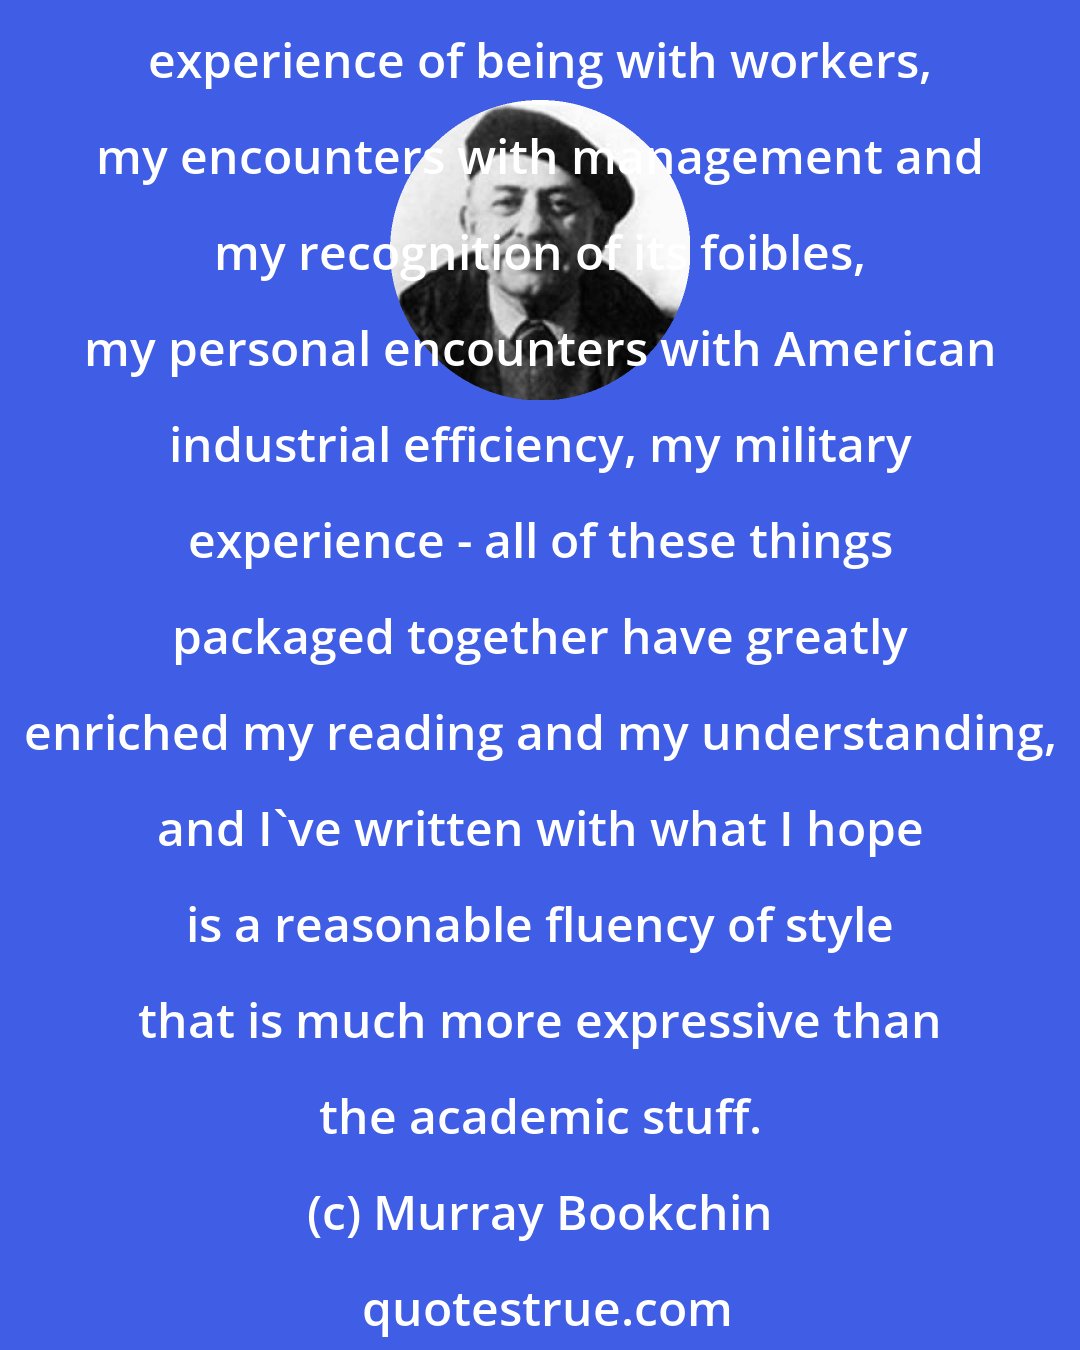 Murray Bookchin: I've worked in the factories of this land, and I've thought freely and creatively. And I think that that has greatly enriched my capacity to abstract intellectually. The experience of being with workers, my encounters with management and my recognition of its foibles, my personal encounters with American industrial efficiency, my military experience - all of these things packaged together have greatly enriched my reading and my understanding, and I've written with what I hope is a reasonable fluency of style that is much more expressive than the academic stuff.